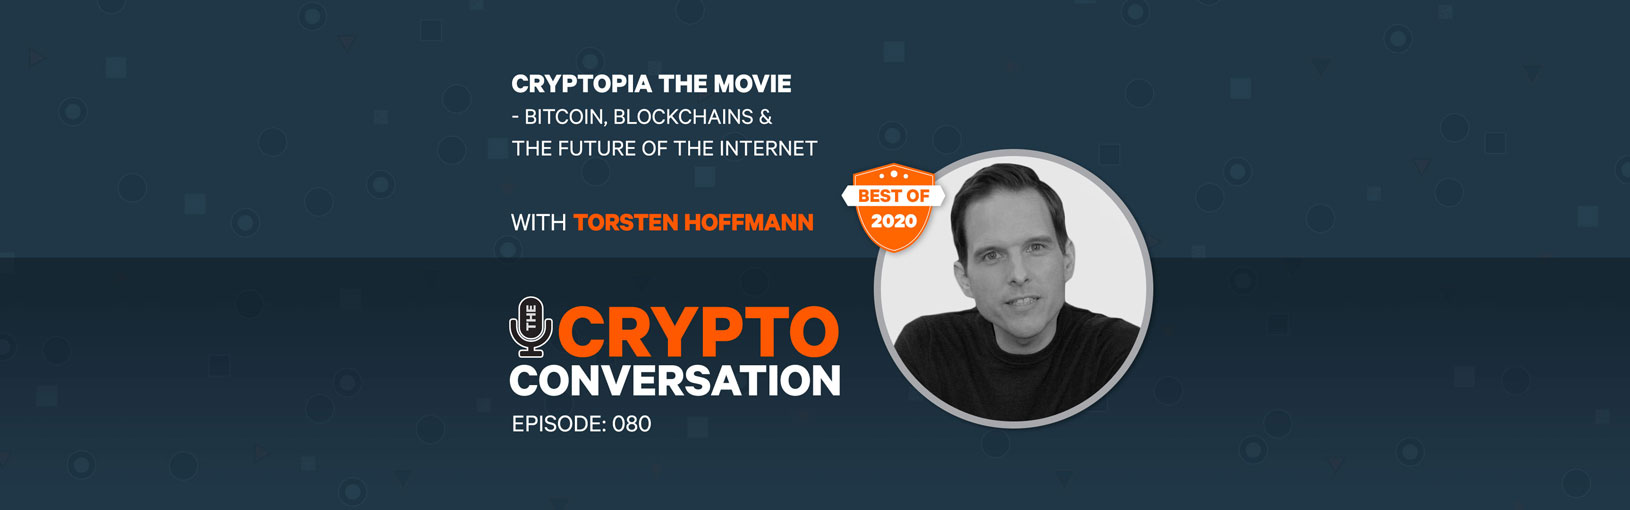 Best of 2020 – Cryptopia the movie – Bitcoin, Blockchains & the Future of the Internet